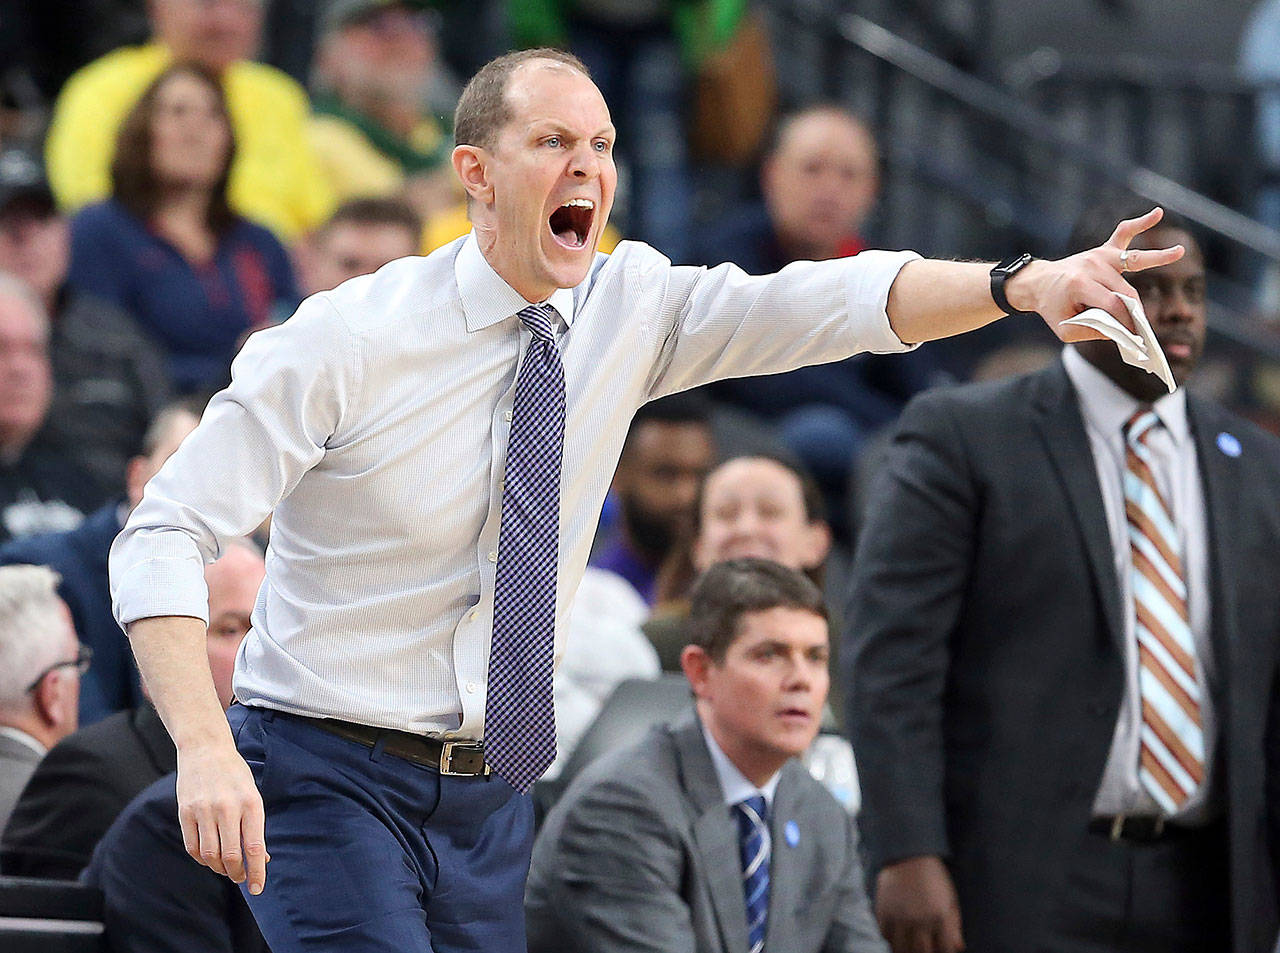 Washington coach Mike Hopkins yells to his team during a loss to Oregon State in the Pac-12 tournament on March 7 in Las Vegas. Hopkins reasserted his commitment to the Huskies on Thursday despite rumors of interest in him from Pittsburgh. (AP Photo/Isaac Brekken)